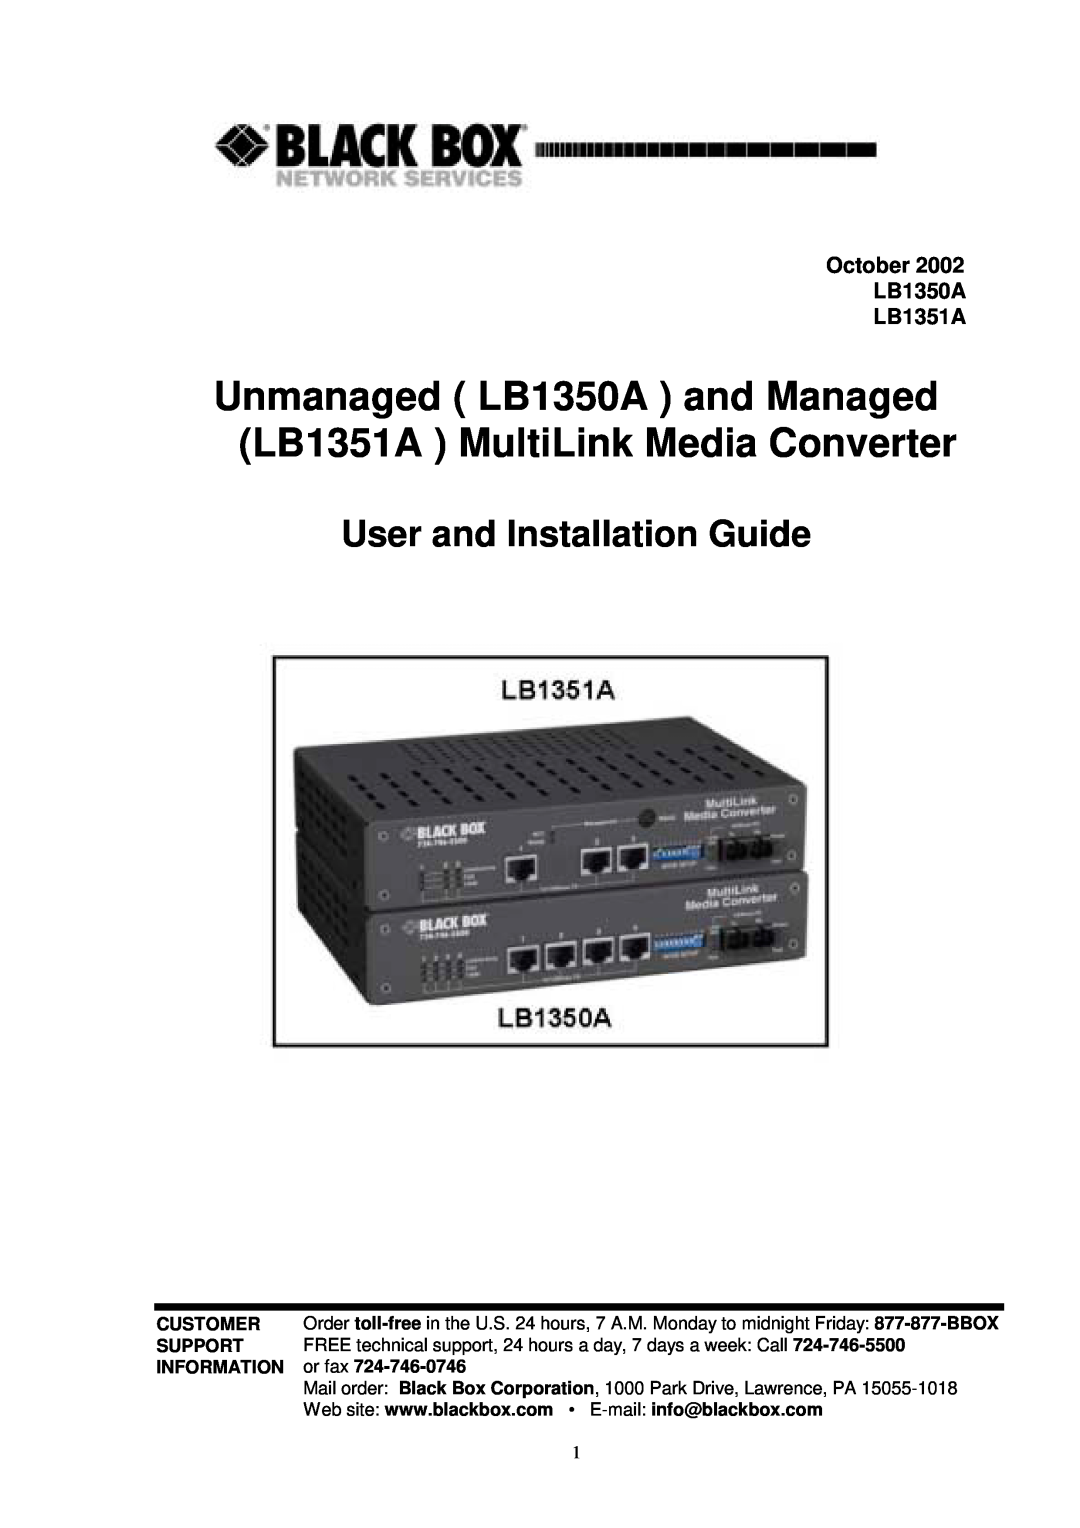 Black Box manual Unmanaged LB1350A and Managed LB1351A MultiLink Media Converter, User and Installation Guide 